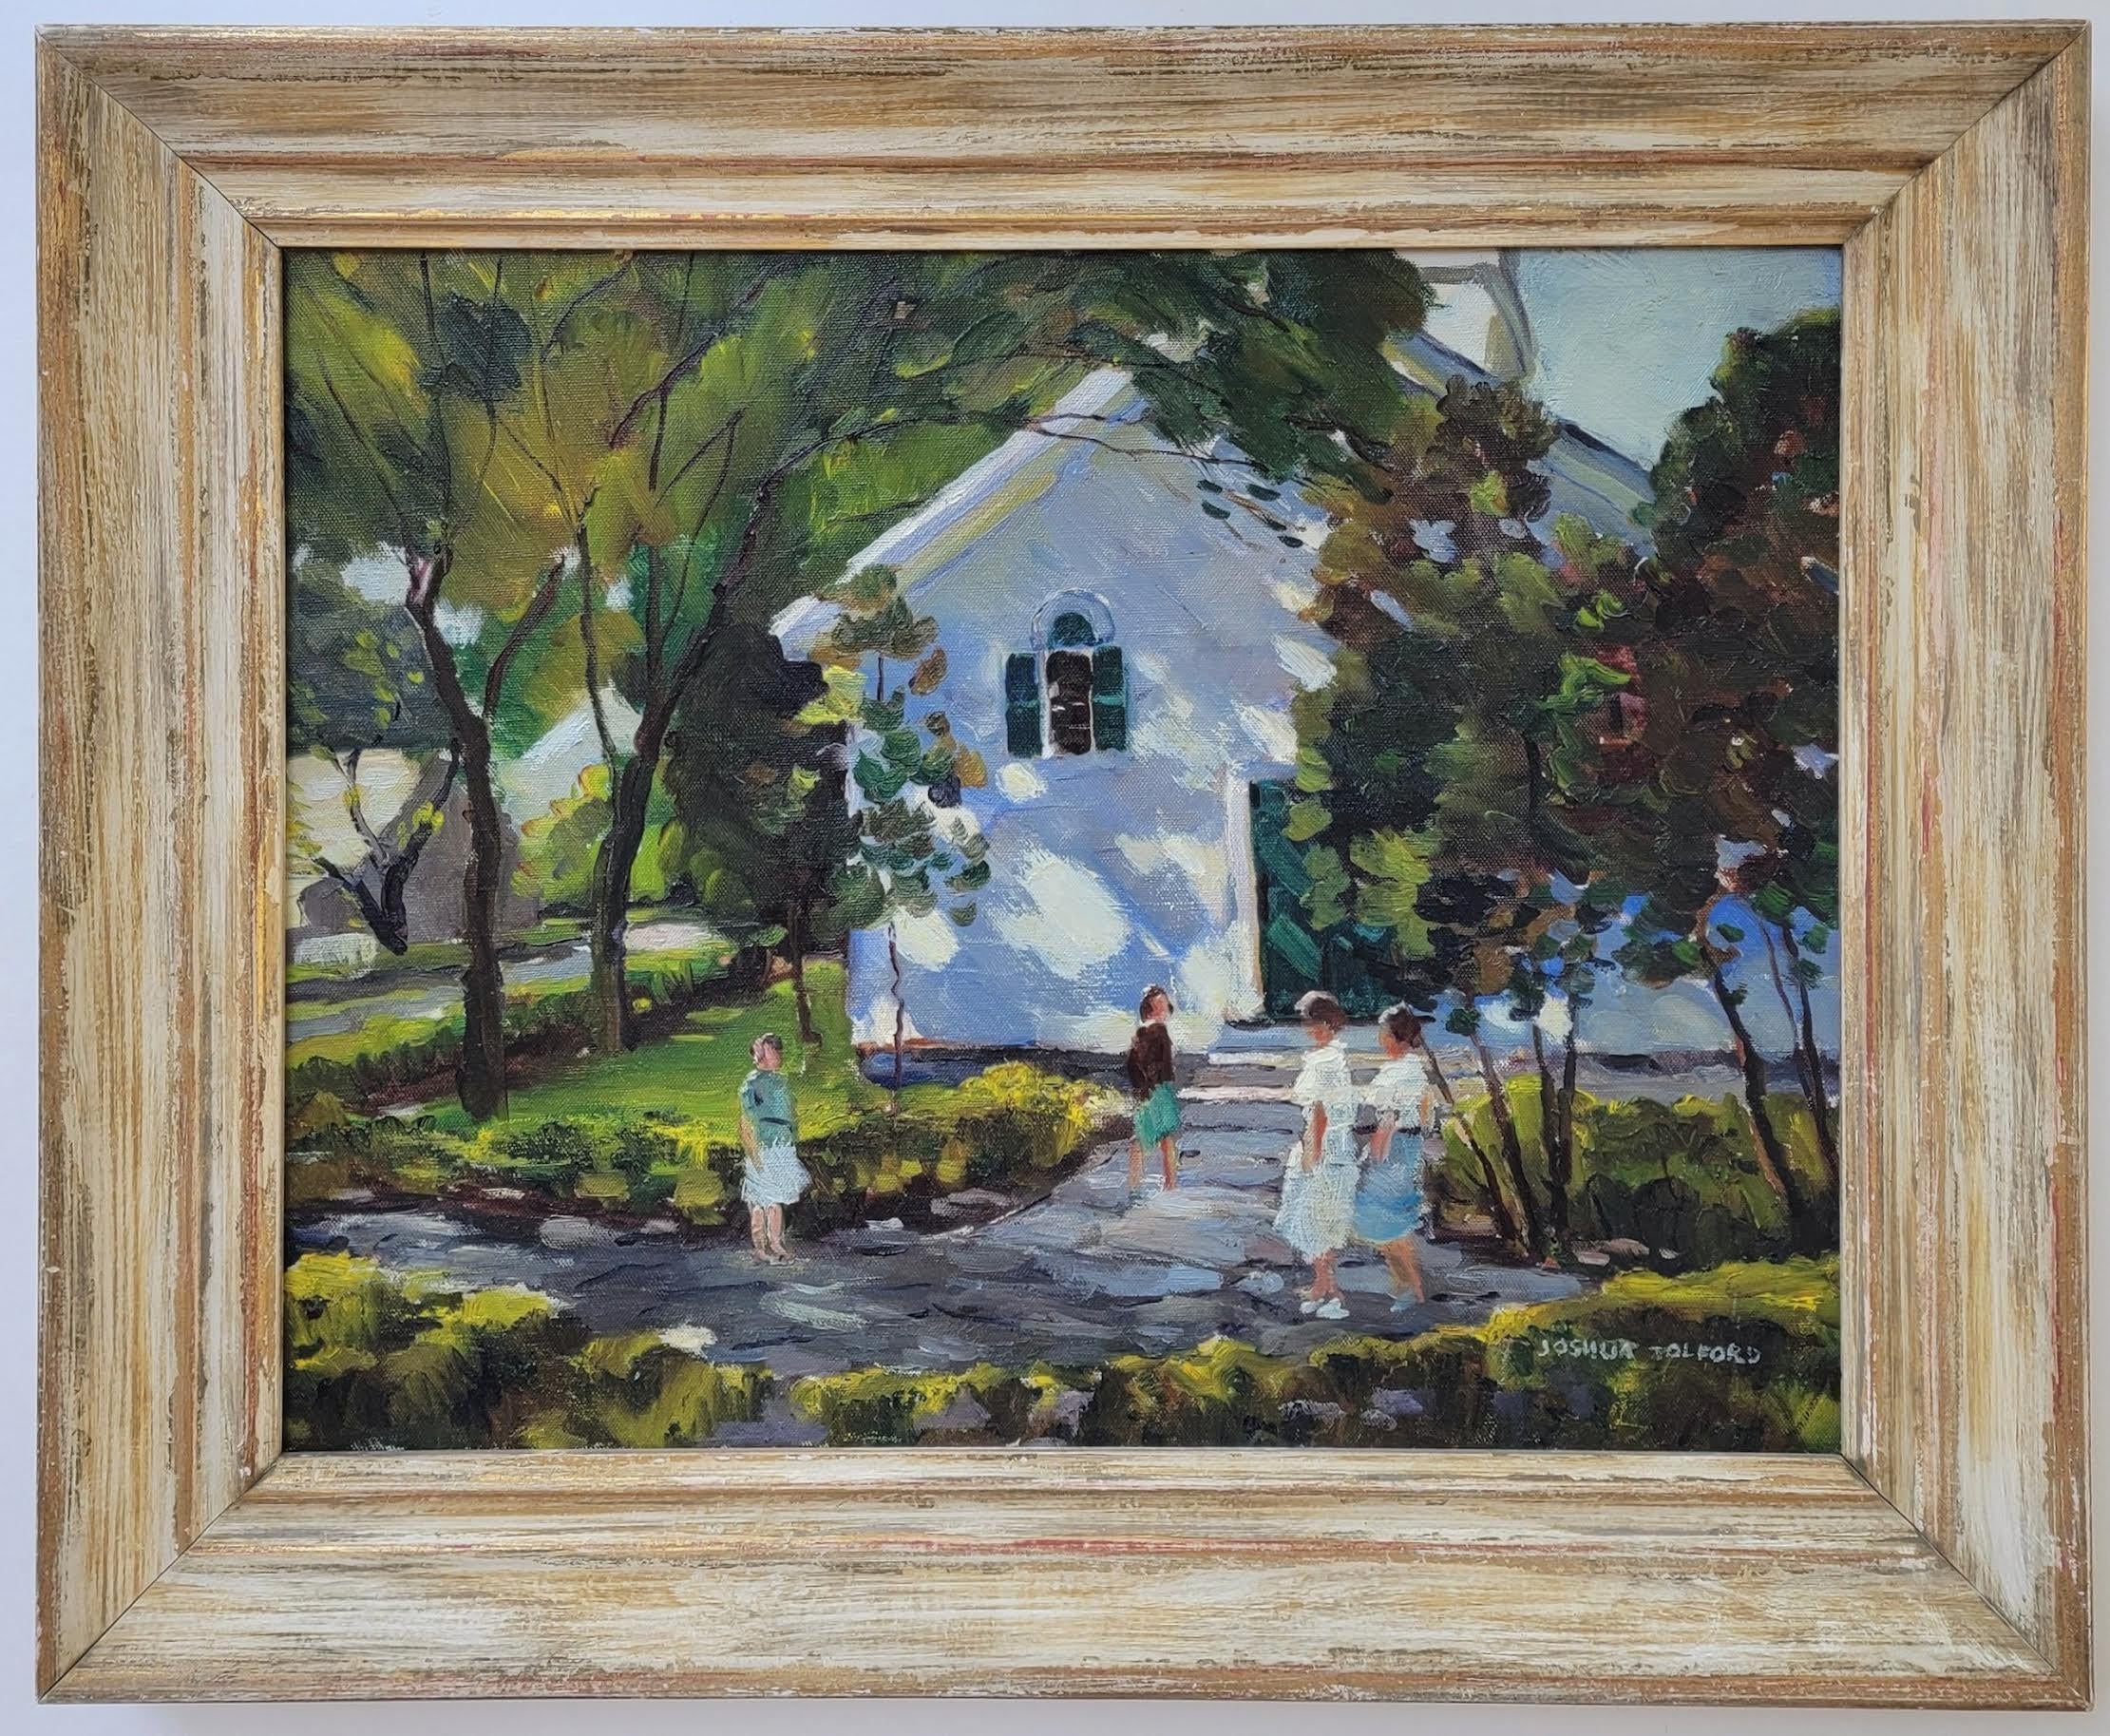 Sunday Morning, 1950s by Joshua Tolford, First Baptist Church, Rockport, MA